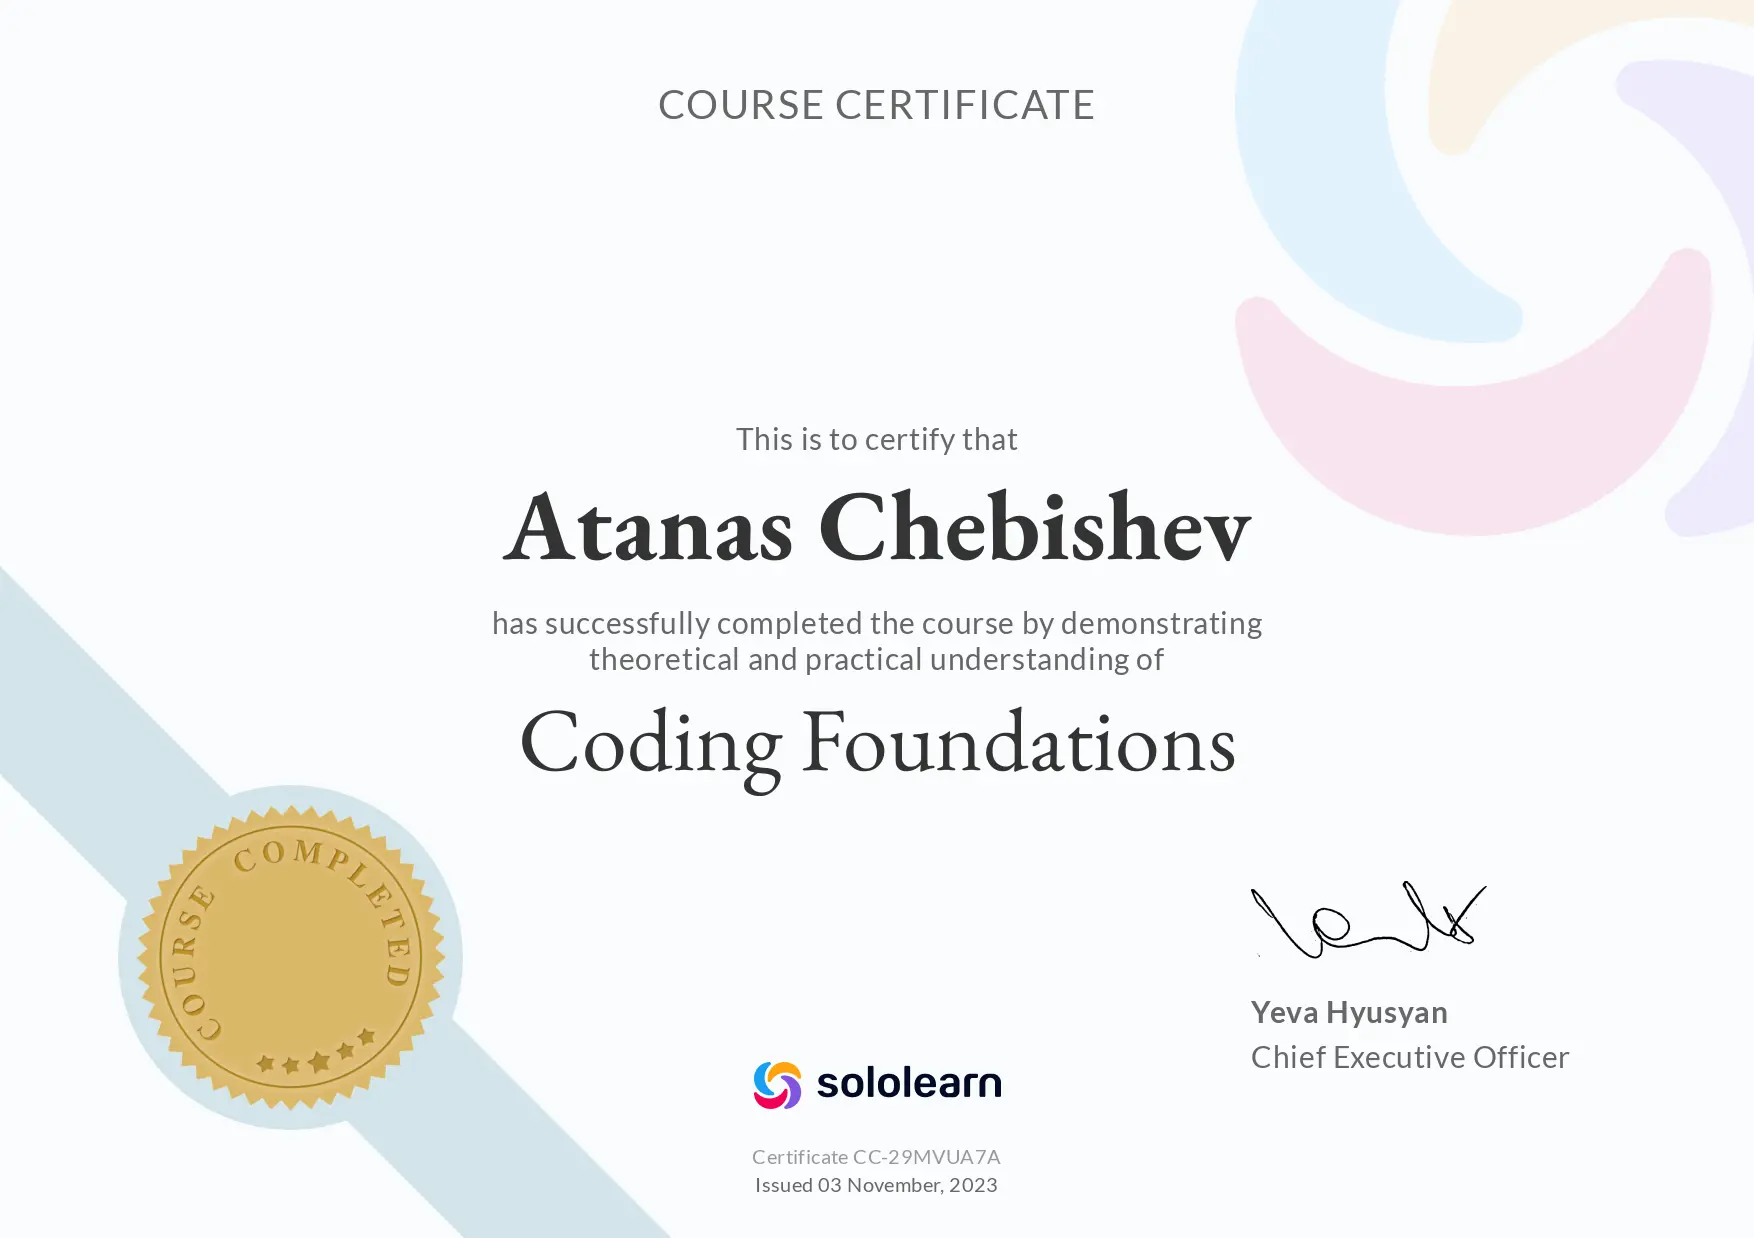 Sololearn Coding Foundations certificate